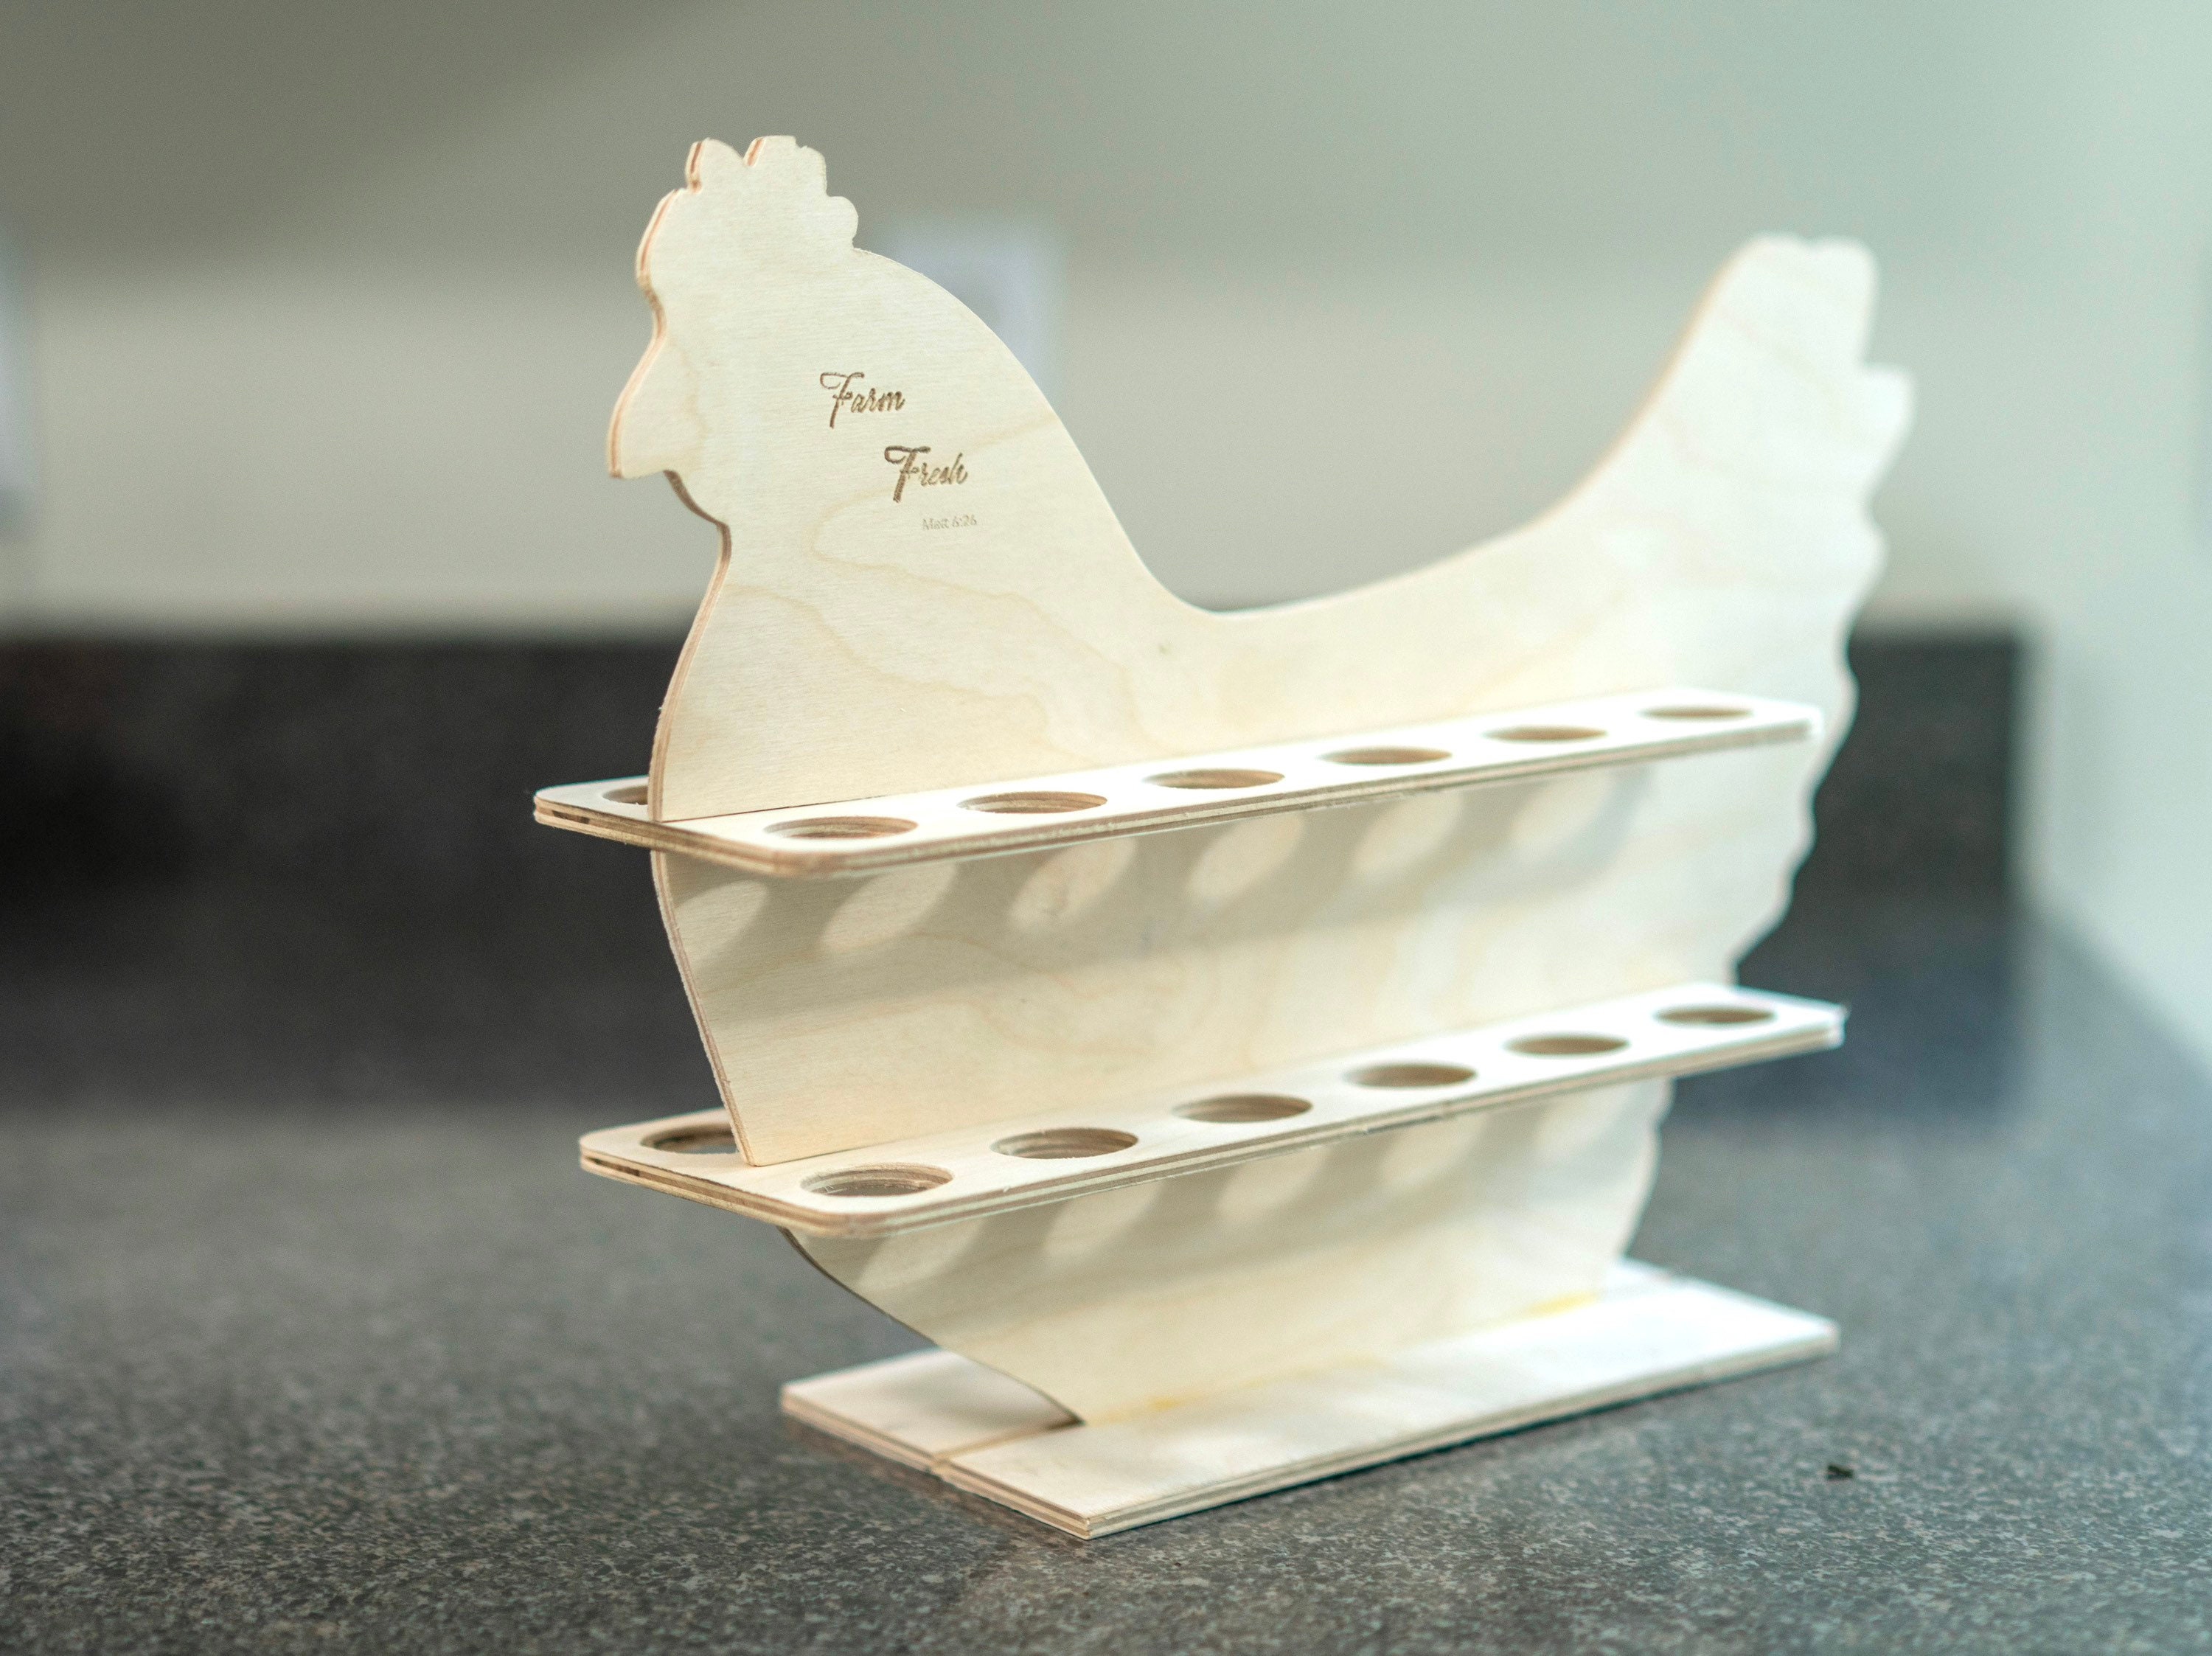 Personalized Wooden Chicken-shaped Egg Holder Storage & Display for Farm  Fresh Eggs Countertop Kitchen Accessory Two Dozen Eggs Rack 